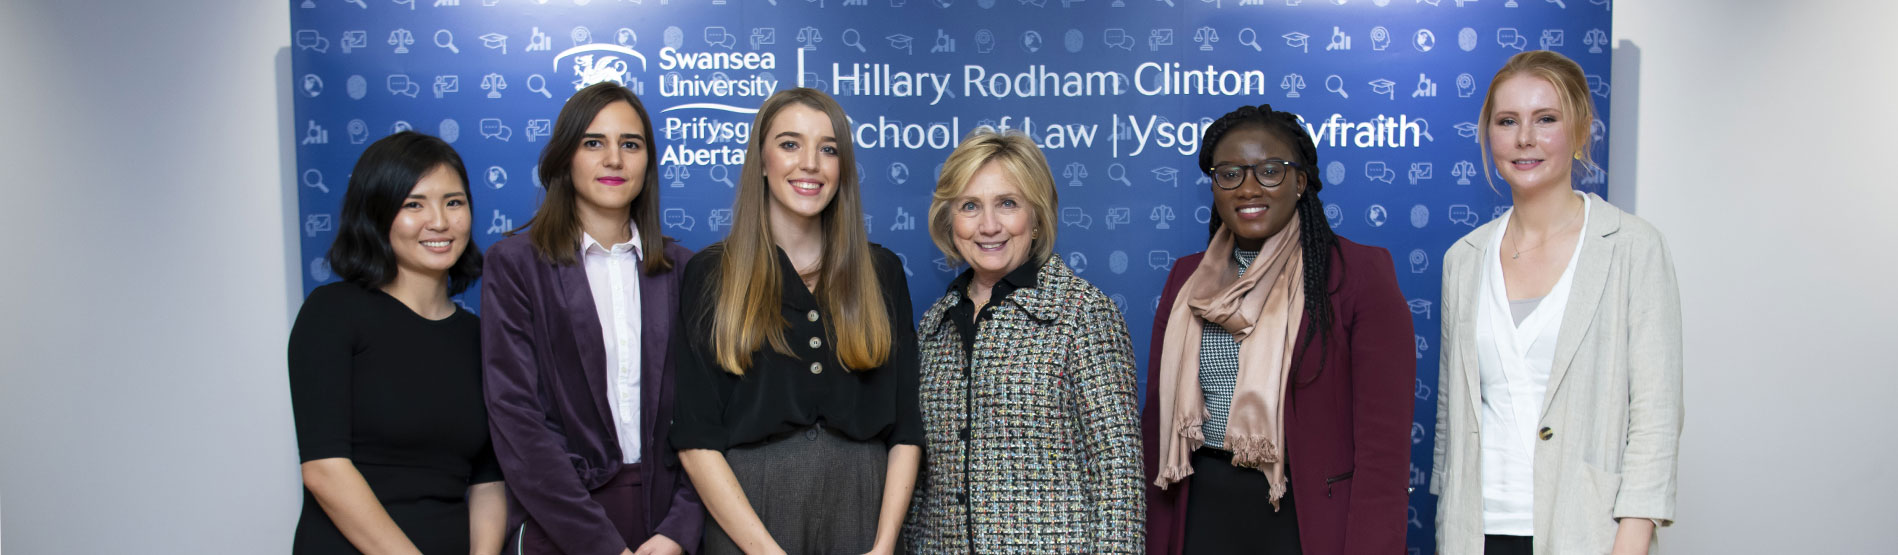 the scholars with hillary clinton